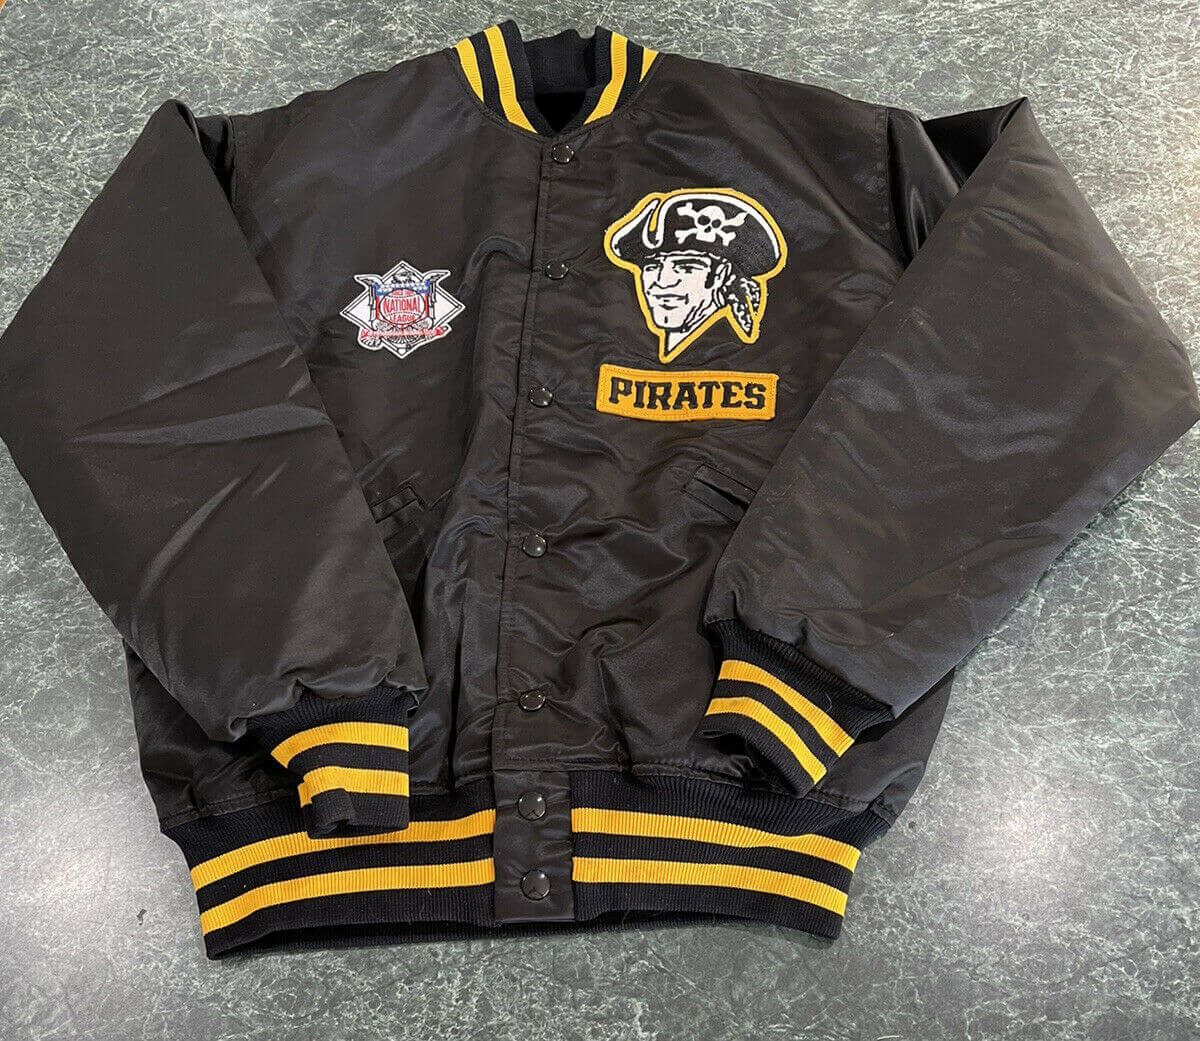 Maker of Jacket Sports Leagues Jackets MLB Vintage Pittsburgh Pirates Brown Satin